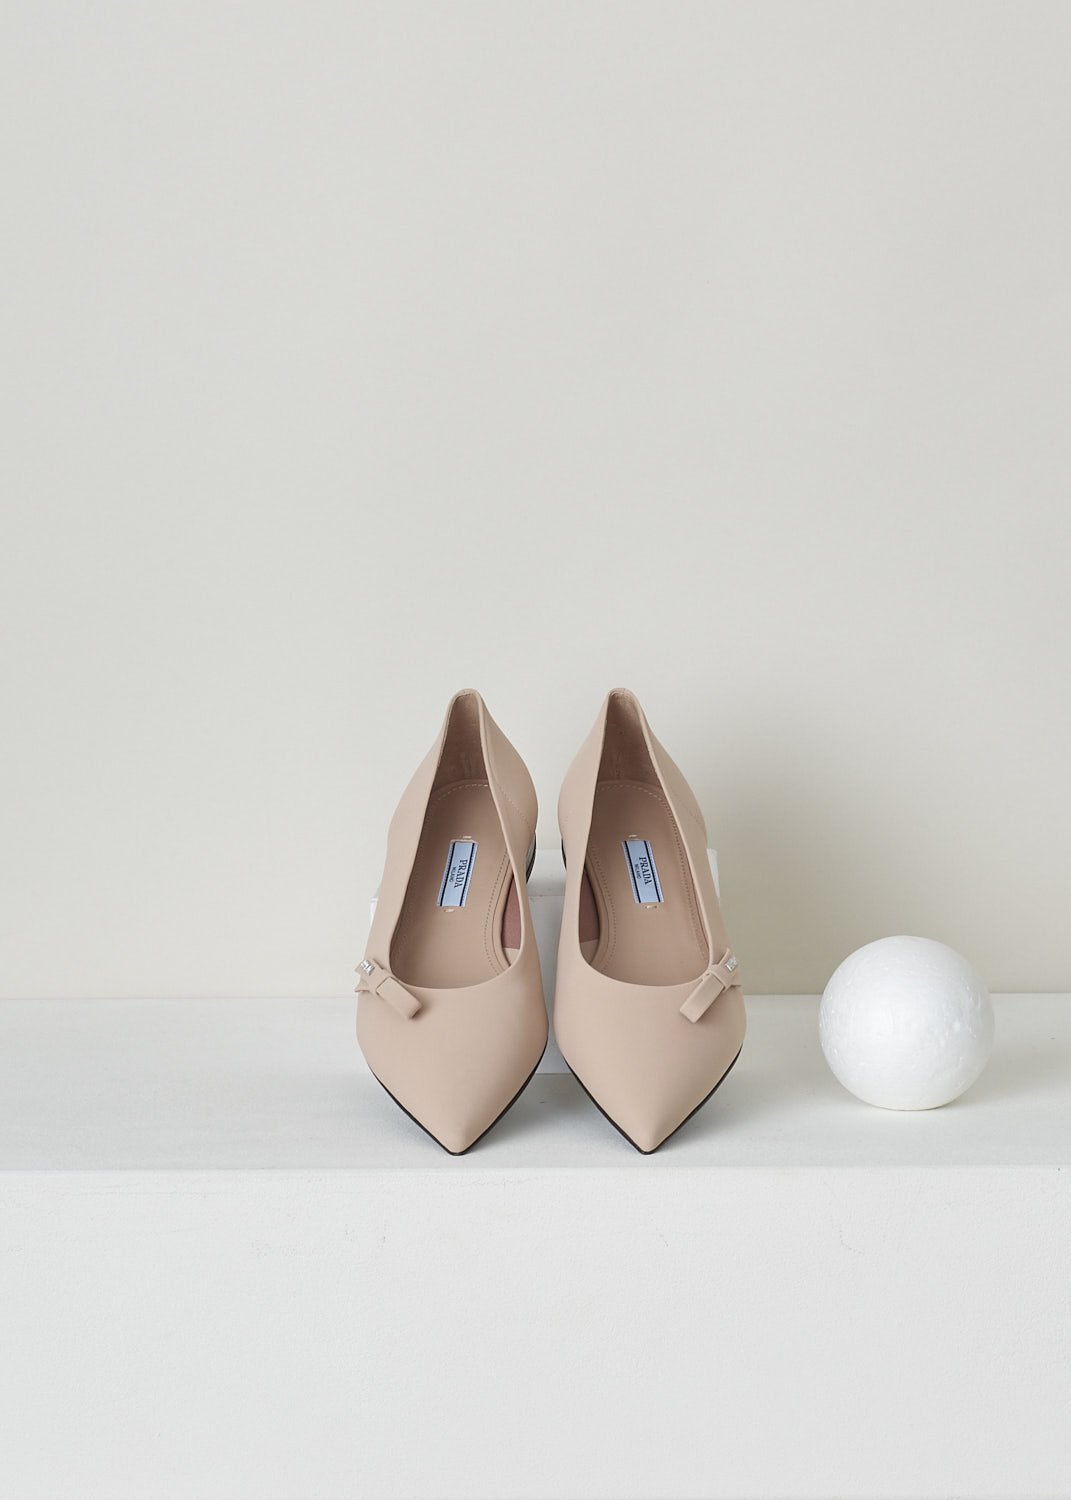 PRADA, NUDE BALLET FLATS WITH POINTED TOE, TESSUTO_TECH_1F273L_3KQ6_F0A48_NUDO, Pink, Beige, Top, These nude colored ballet flats have a pointed toe with, along the topline, a bow with the brand's name in silver-toned letters. These slip-in flats have a small heel. 
